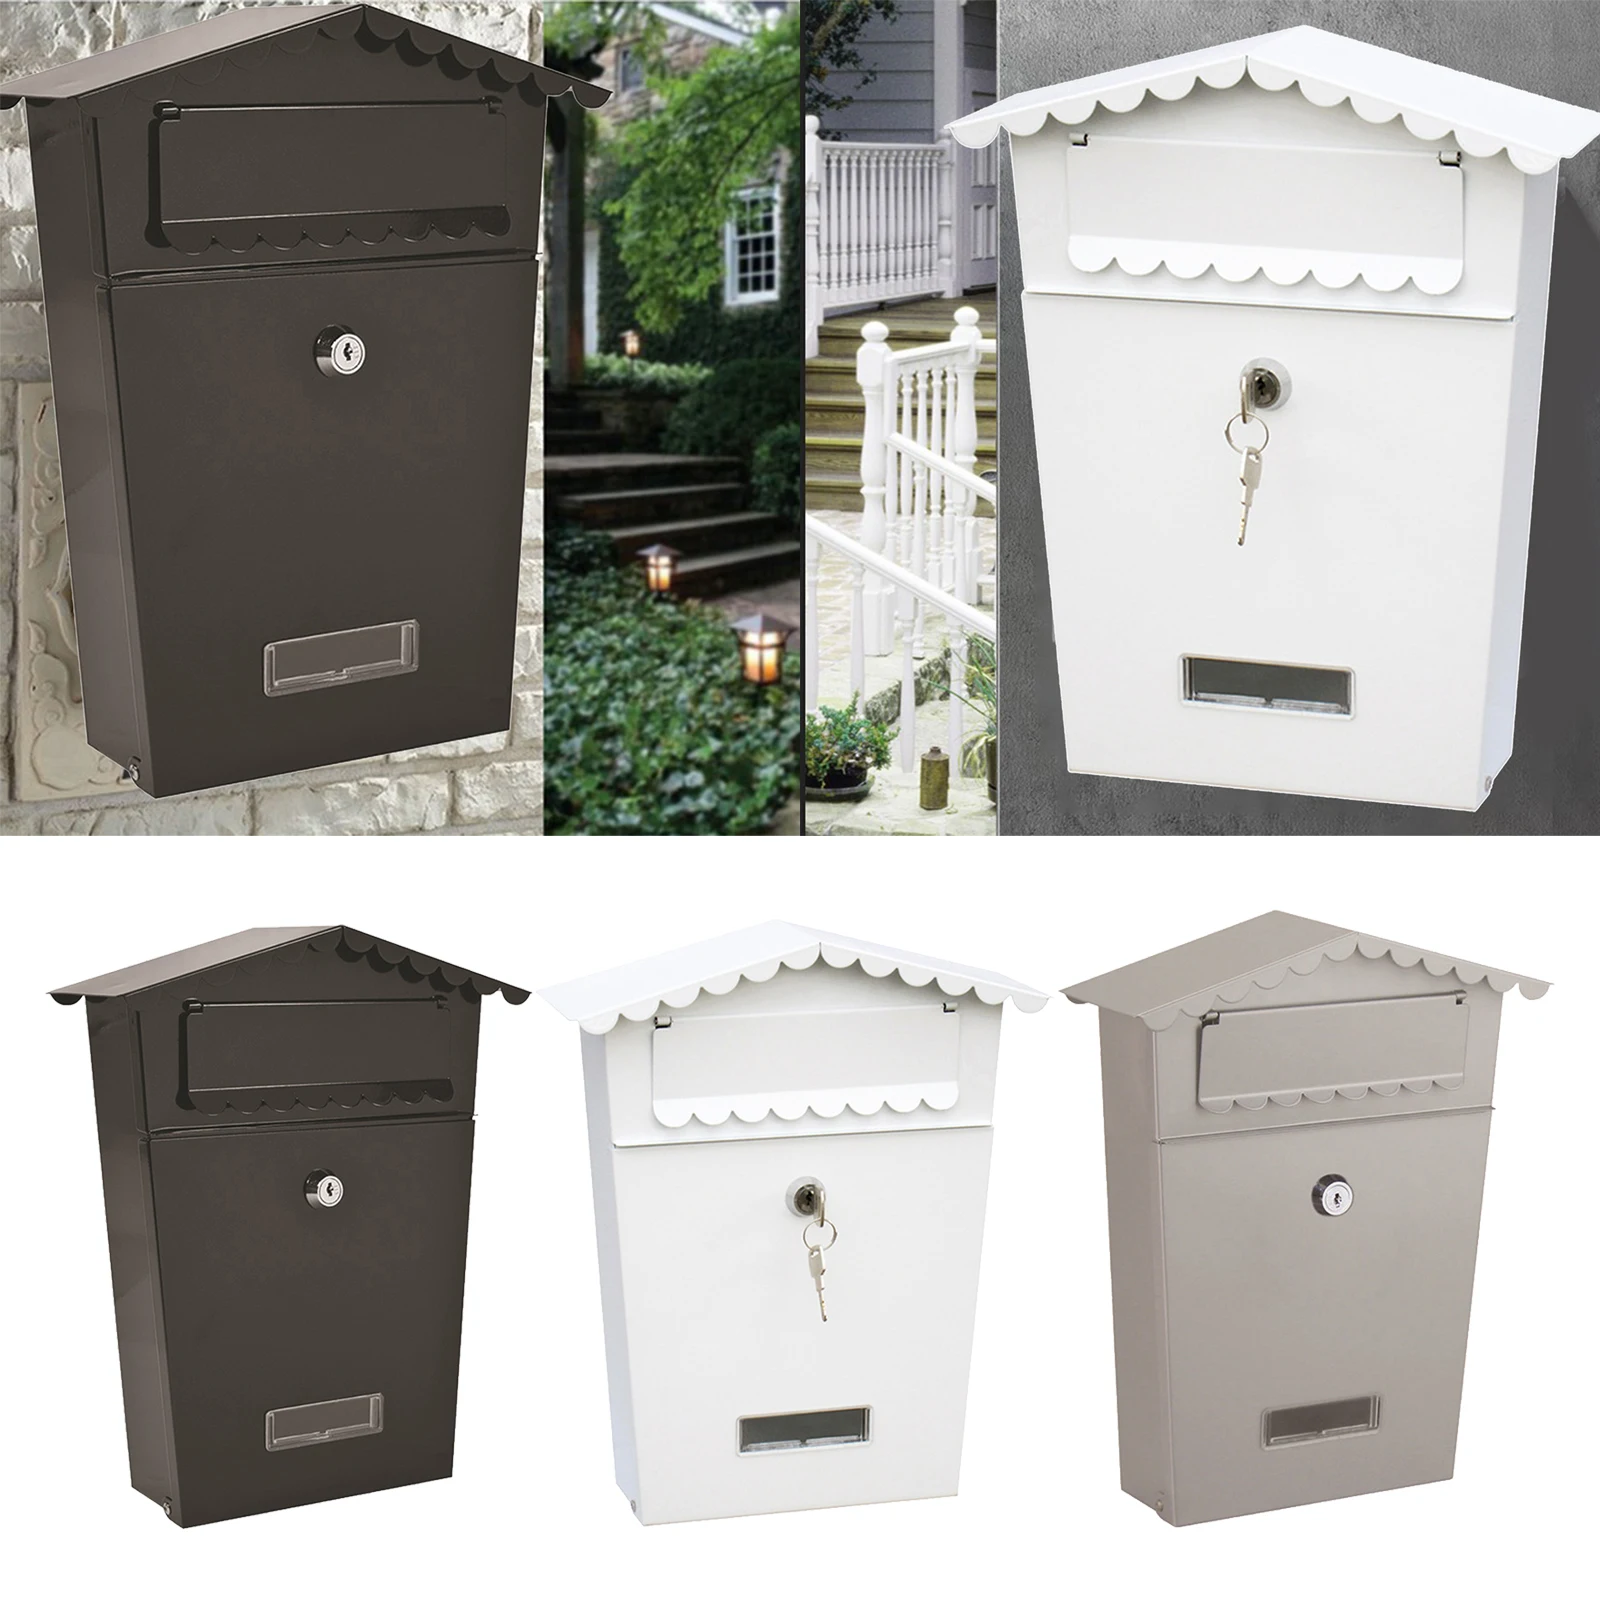 Metal Key Lock Mail Boxes Outdoor Locking Wall Mount Mailbox Security Key Drop Box Collection Boxes 25x8x30cm